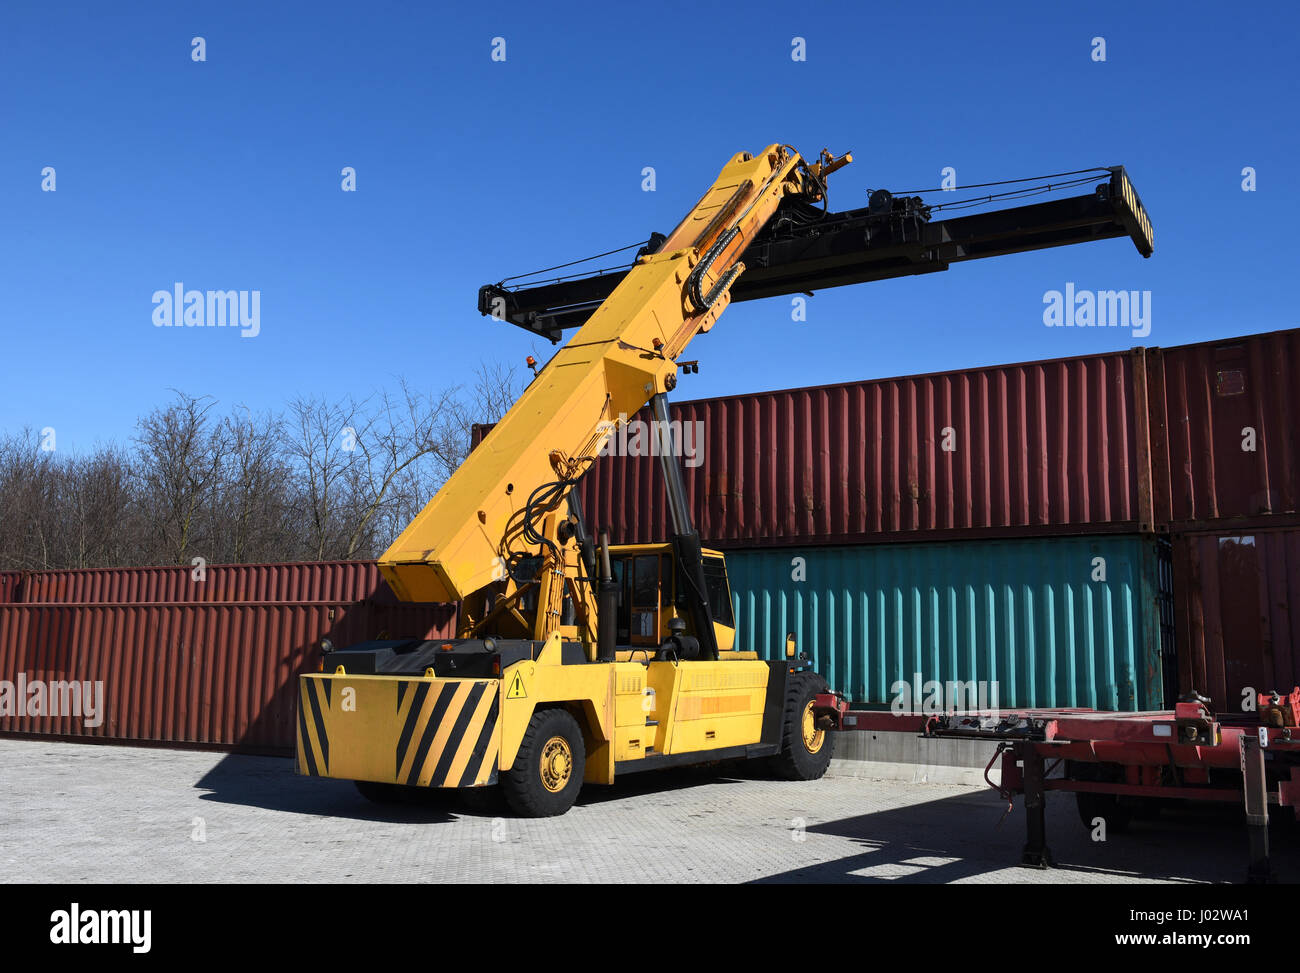 Yellow container handling vehicle in action near stack of metal containers outdoors view from the back Stock Photo